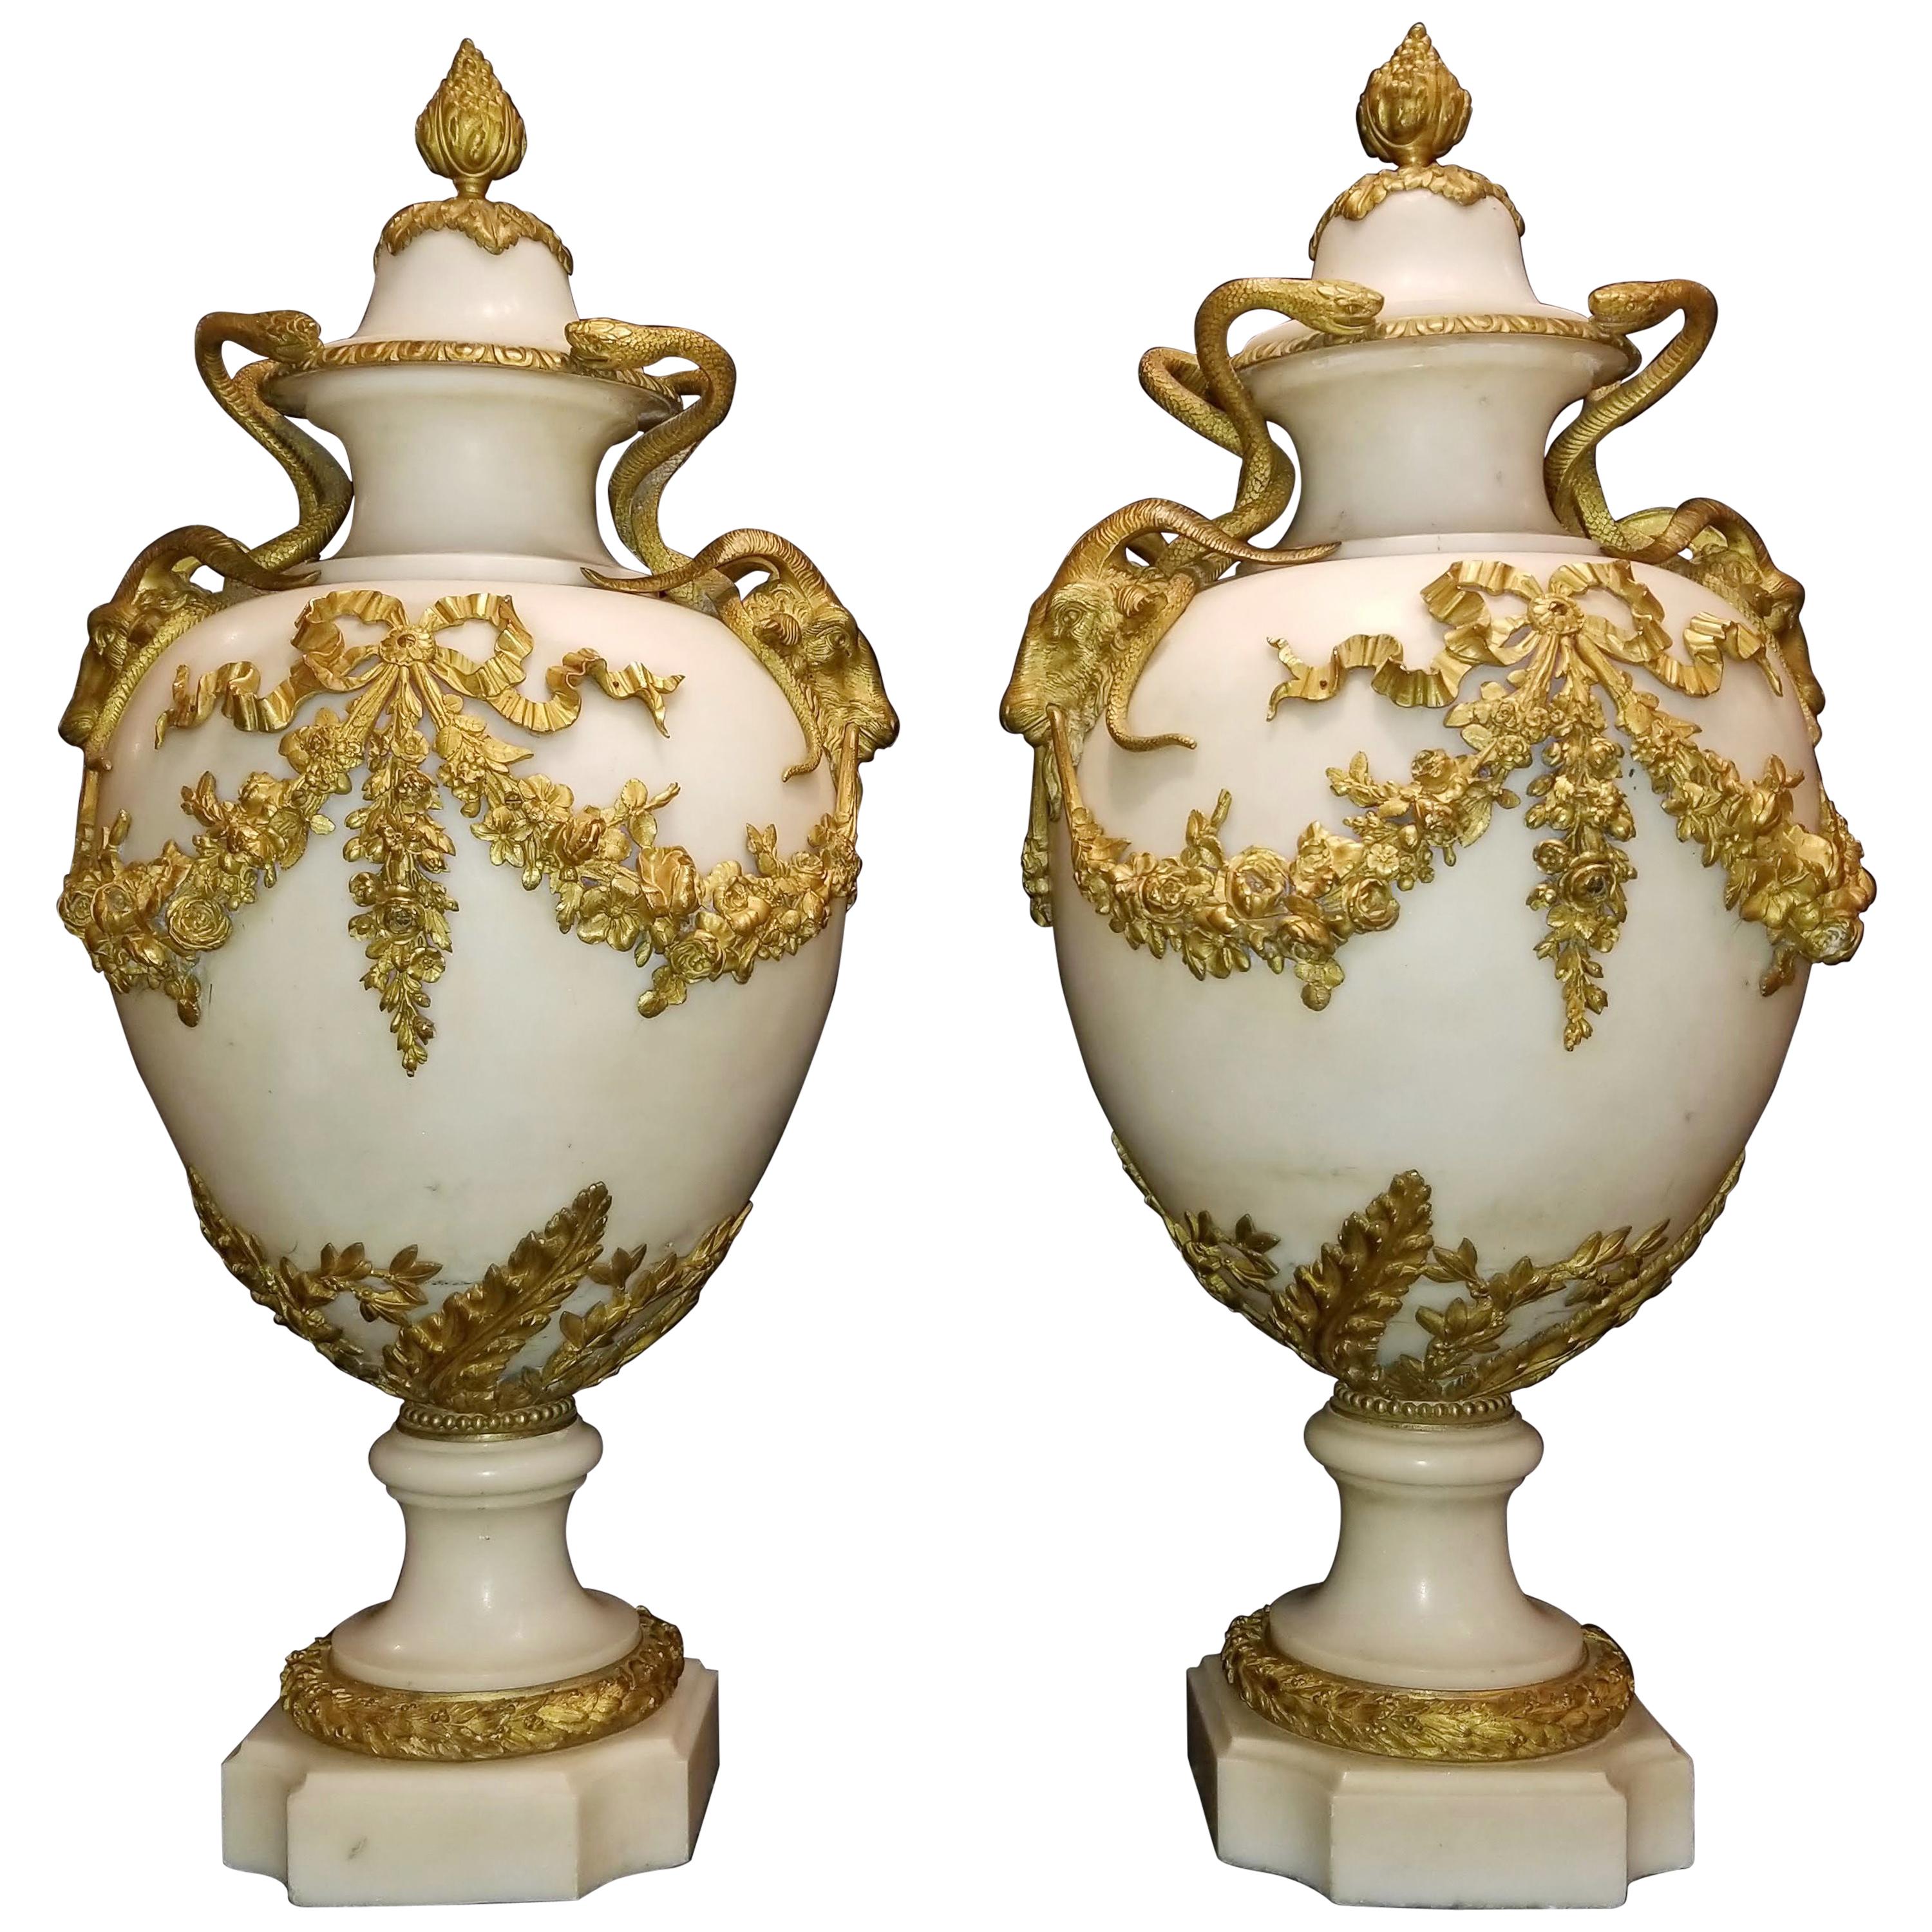 Pair of French Louis XVI Doré Bronze and White Carrara Marble Covered Vases